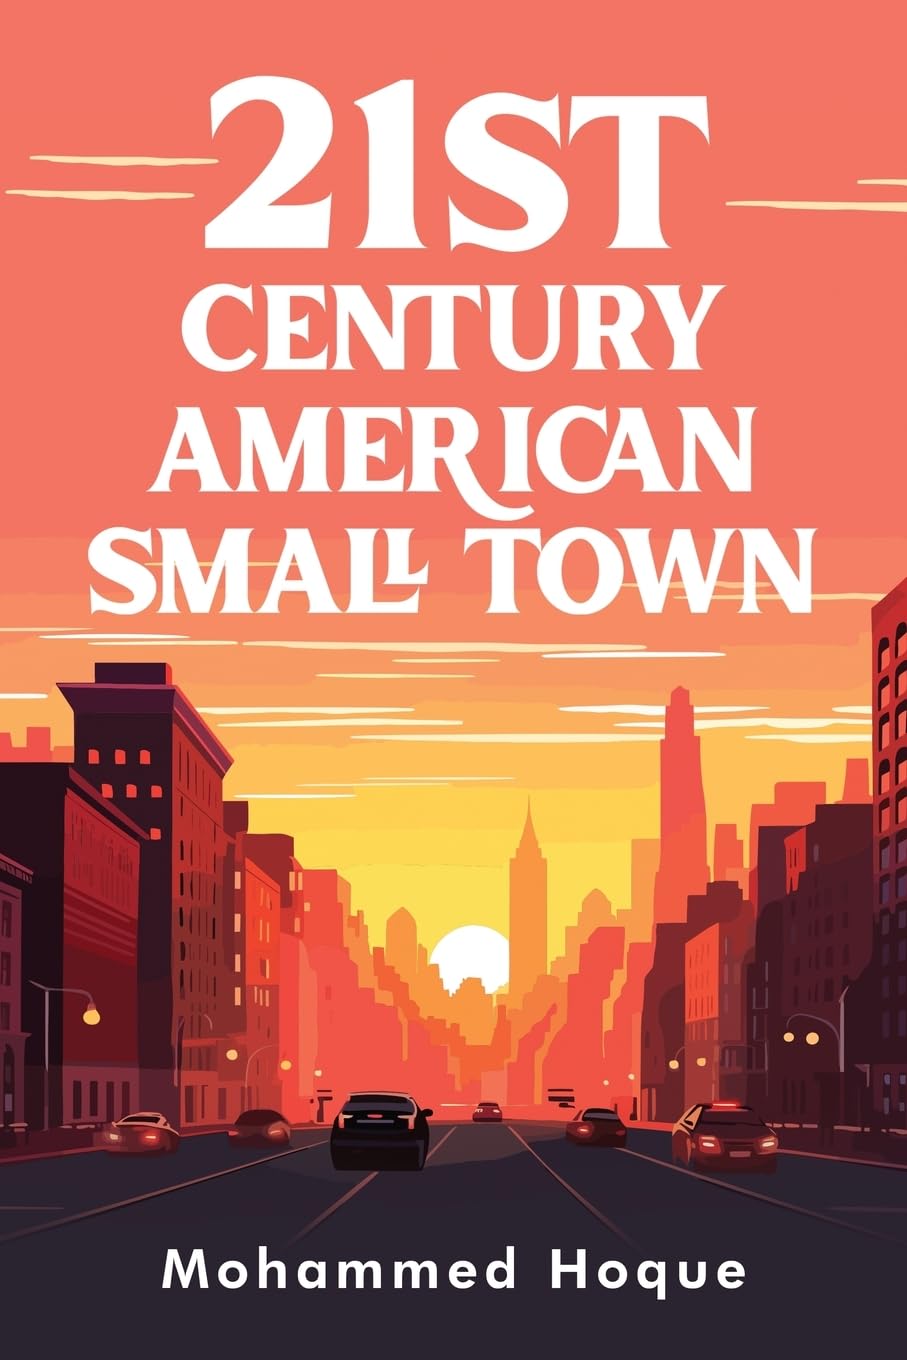 New novel "21st Century American Small Town" by Mohammed Hoque is released, the intriguing tale of three personalities and the fate that brings them together